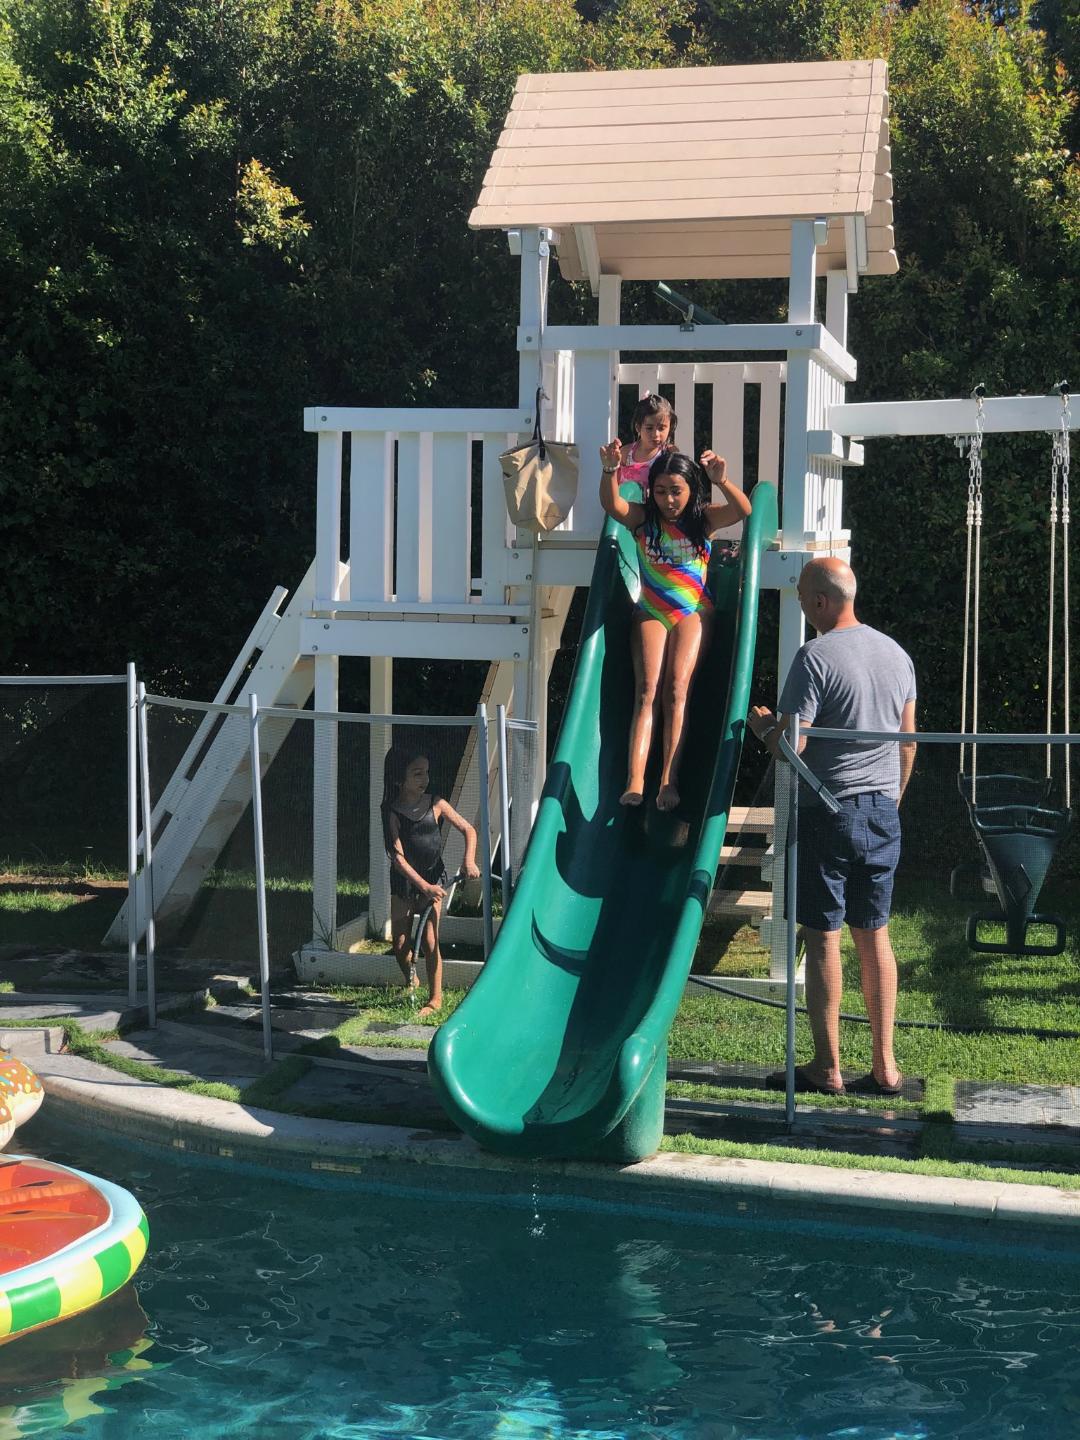 Tower with swimming pool slide